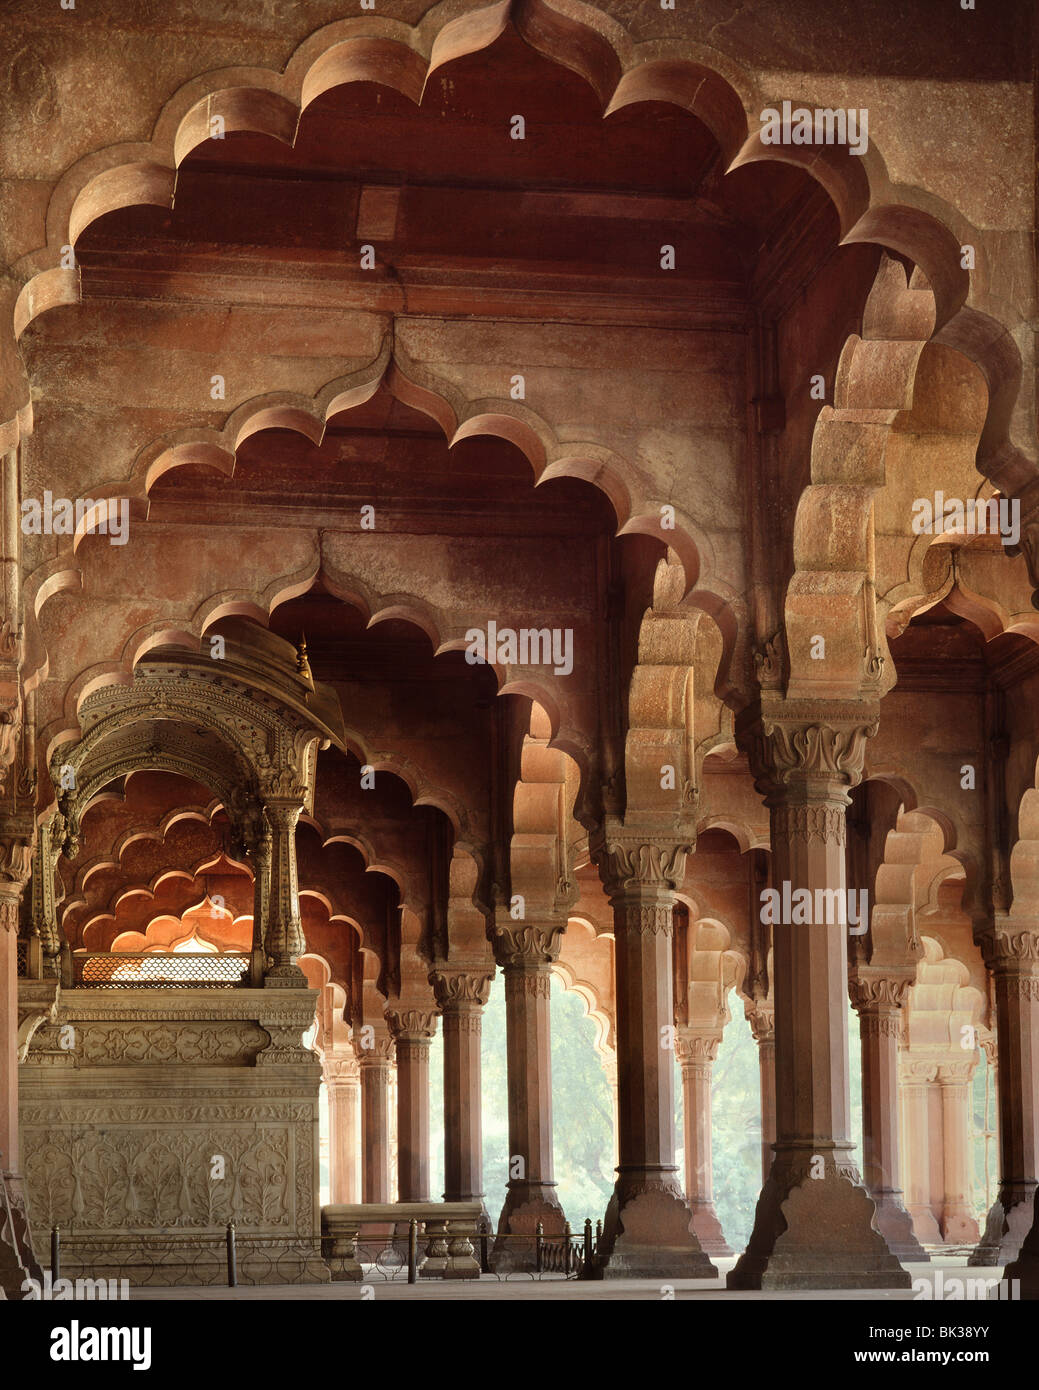 The Throne of Akbar, Red Fort, UNESCO World Heritage Site, Delhi, India, Asia Stock Photo